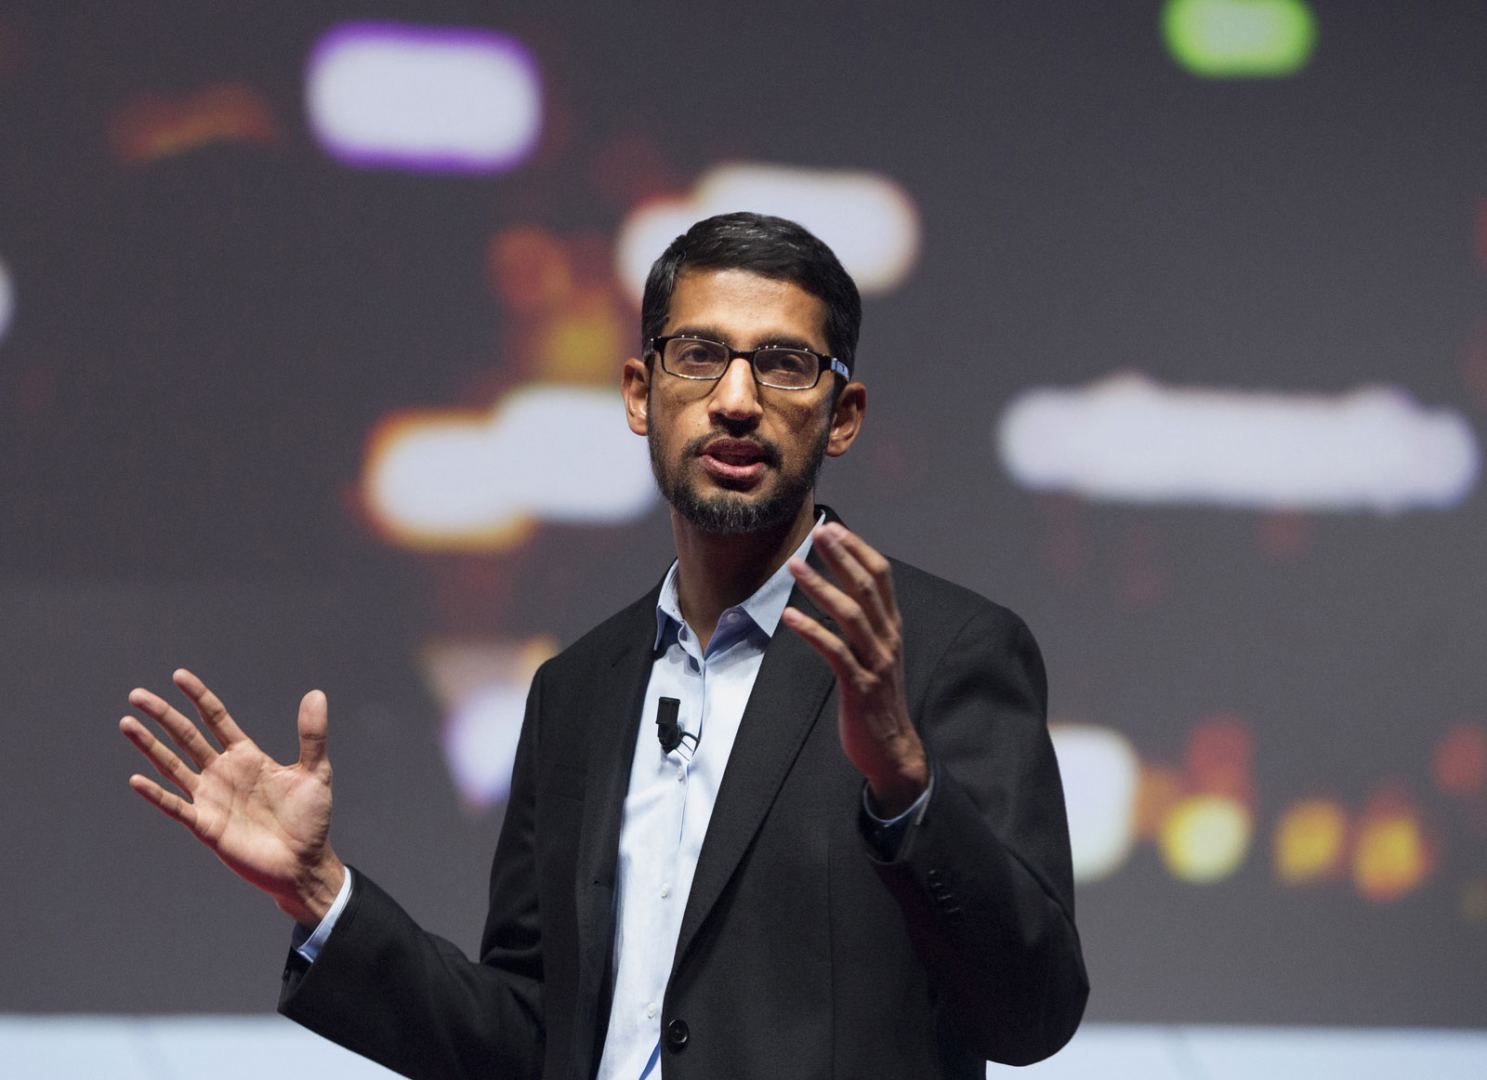 Sundar Pichai: “I am an American citizen but India is deeply within me. So it’s a big part of who I am,”